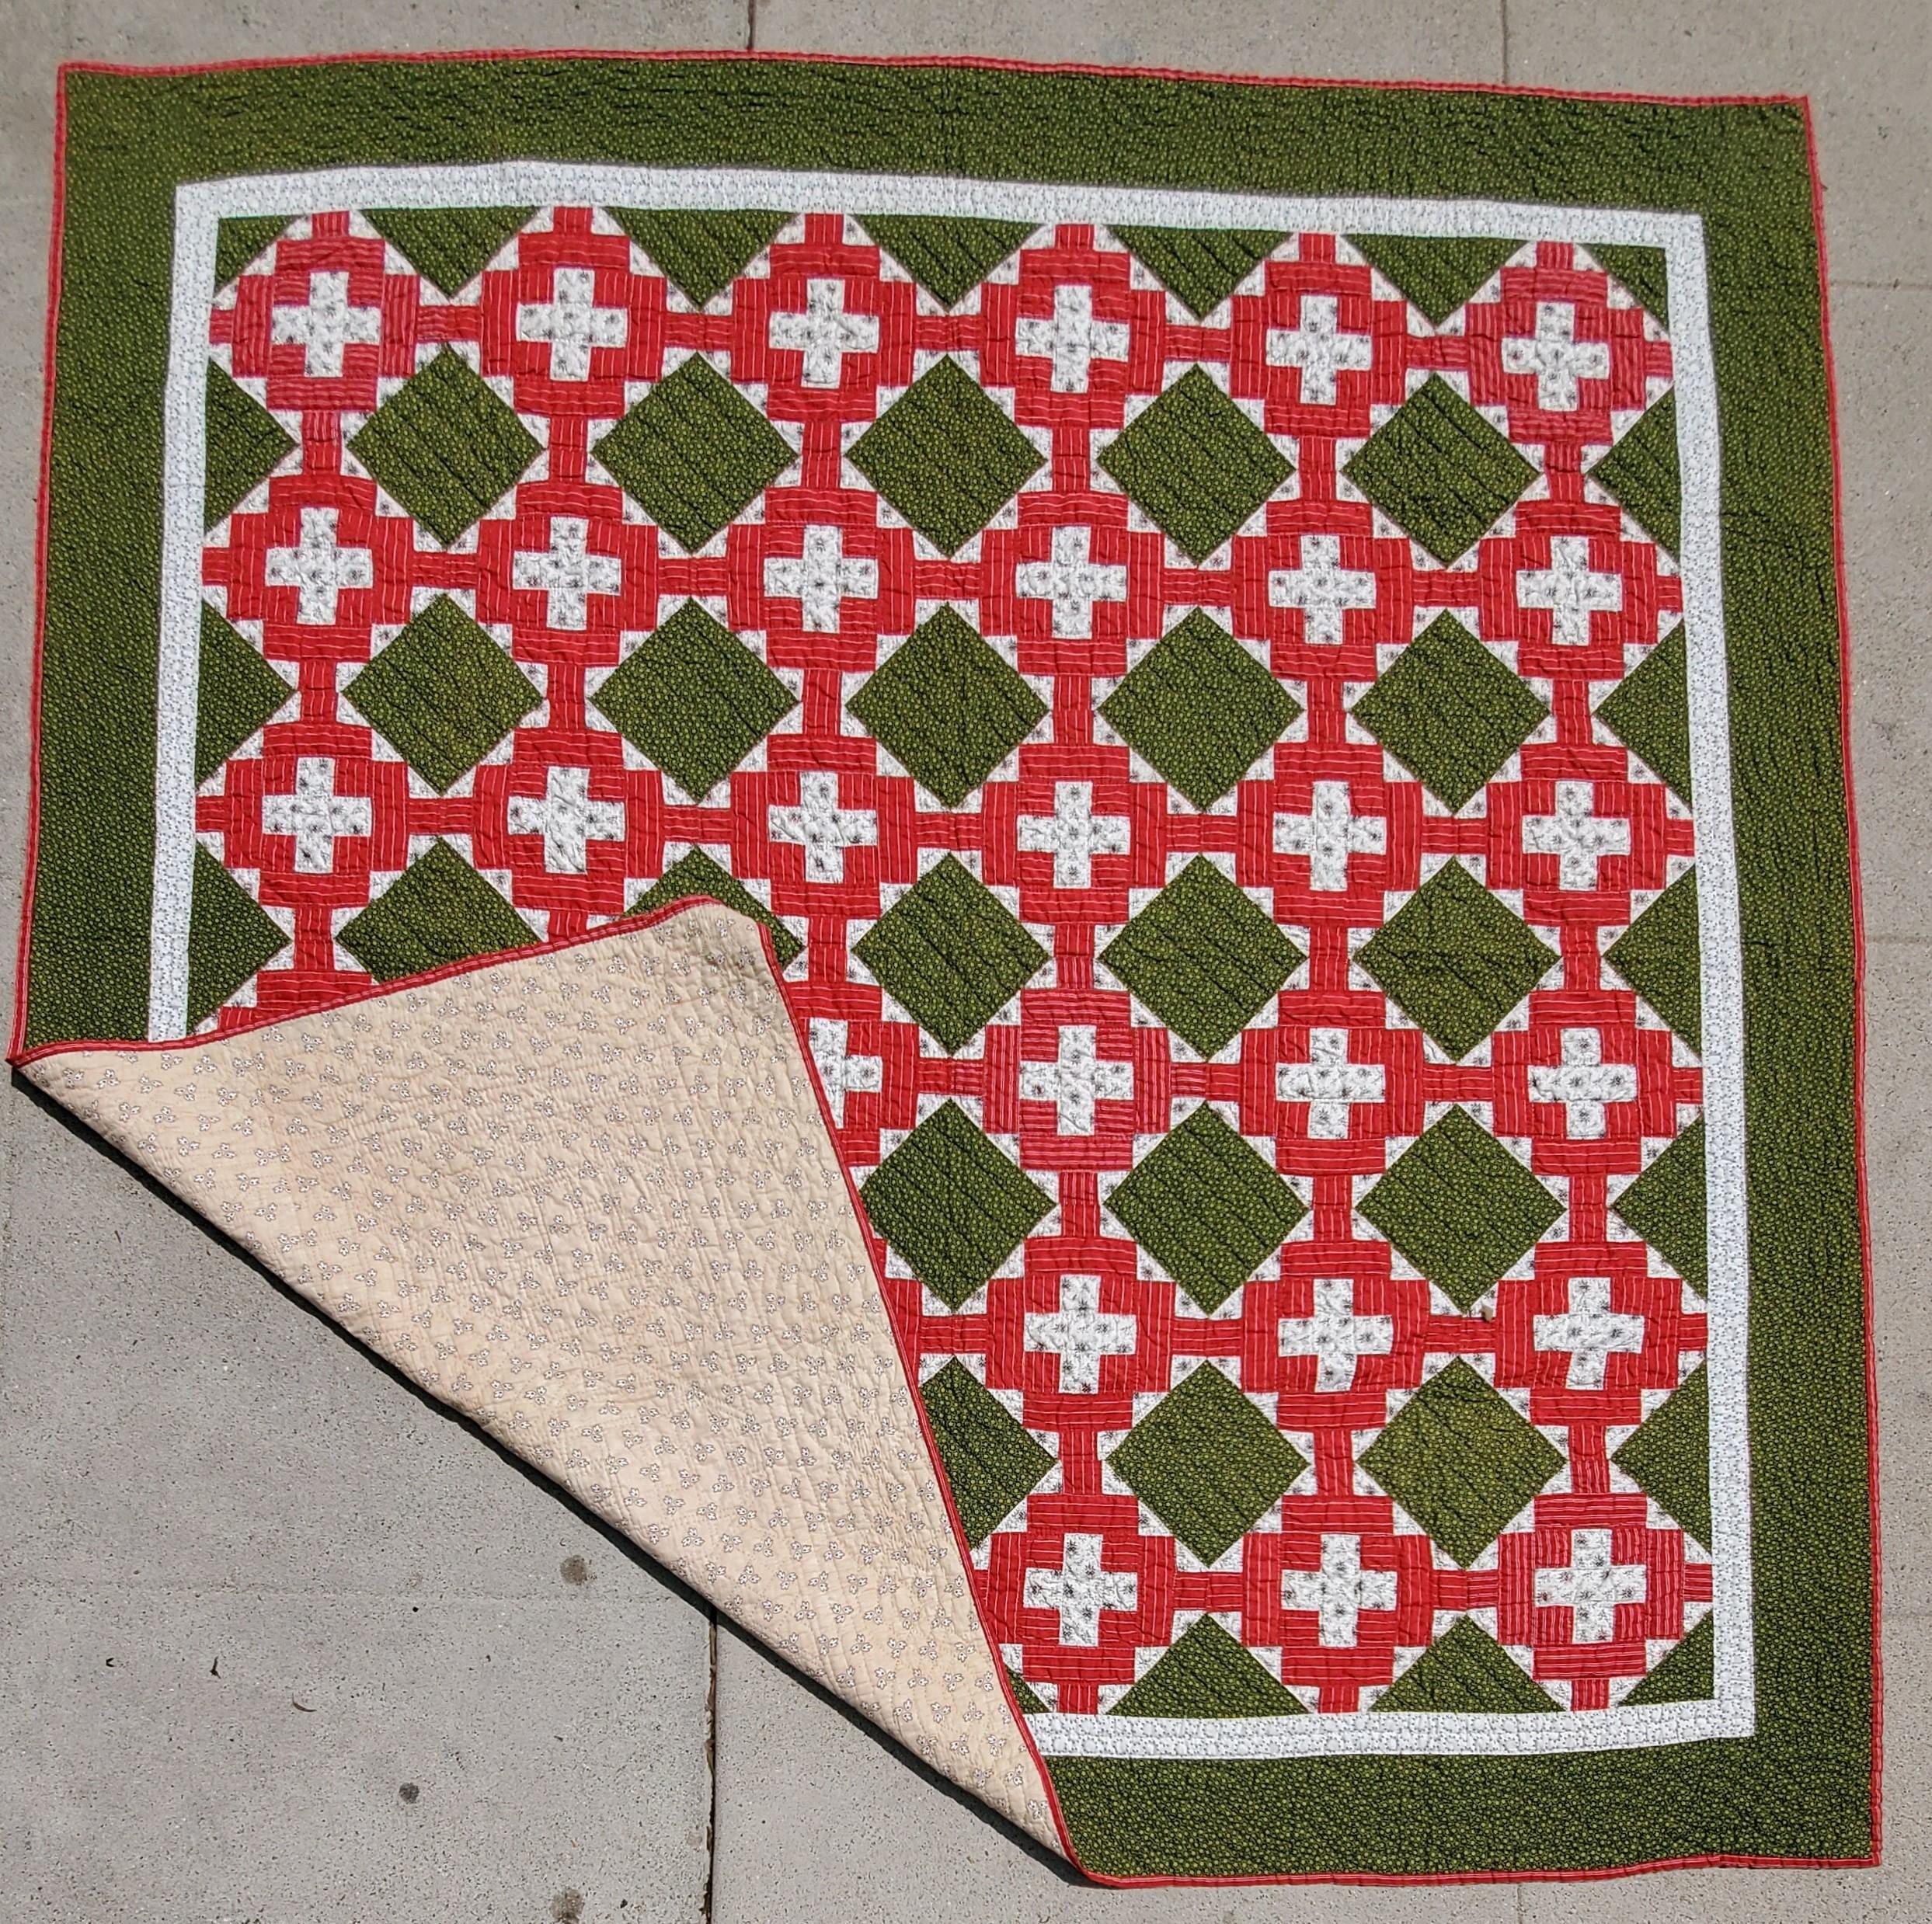 19thc Pennsylvania chimney sweep pattern quilt in red & green colors. This quilt was found in Berks County,Pennsylvania.The condition is very good.